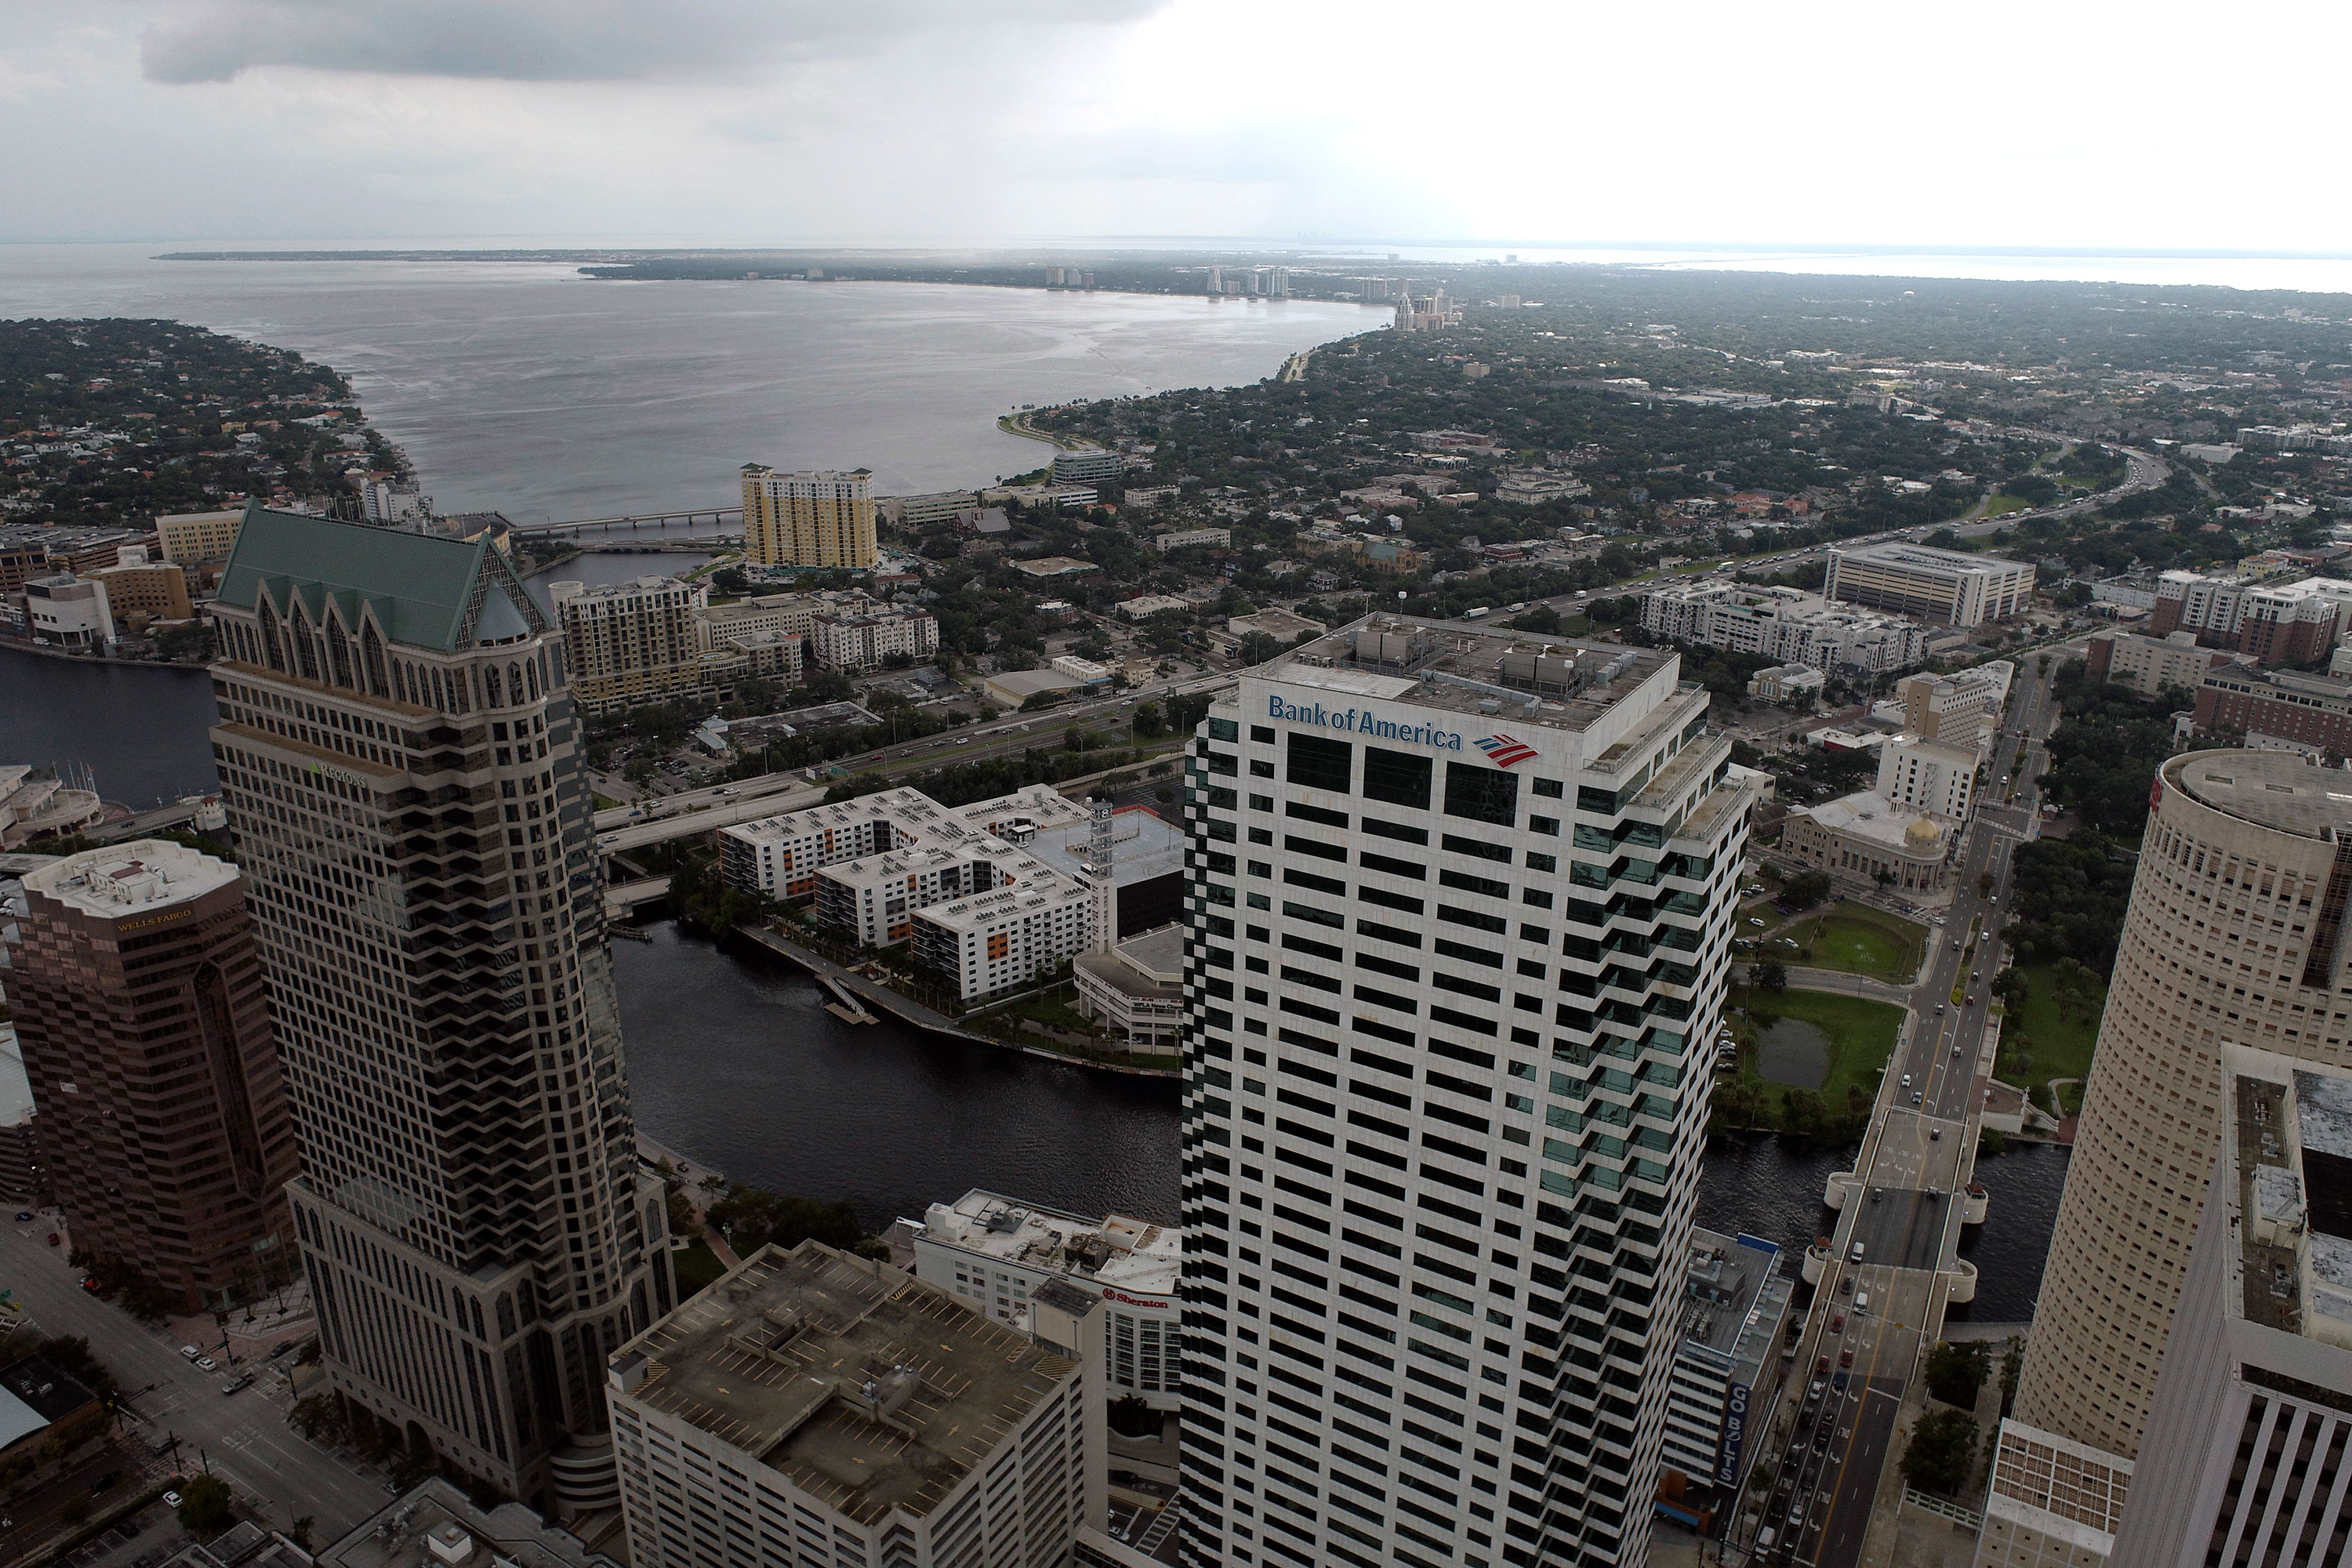 The city of Tampa, Florida, is seen from above on Monday.